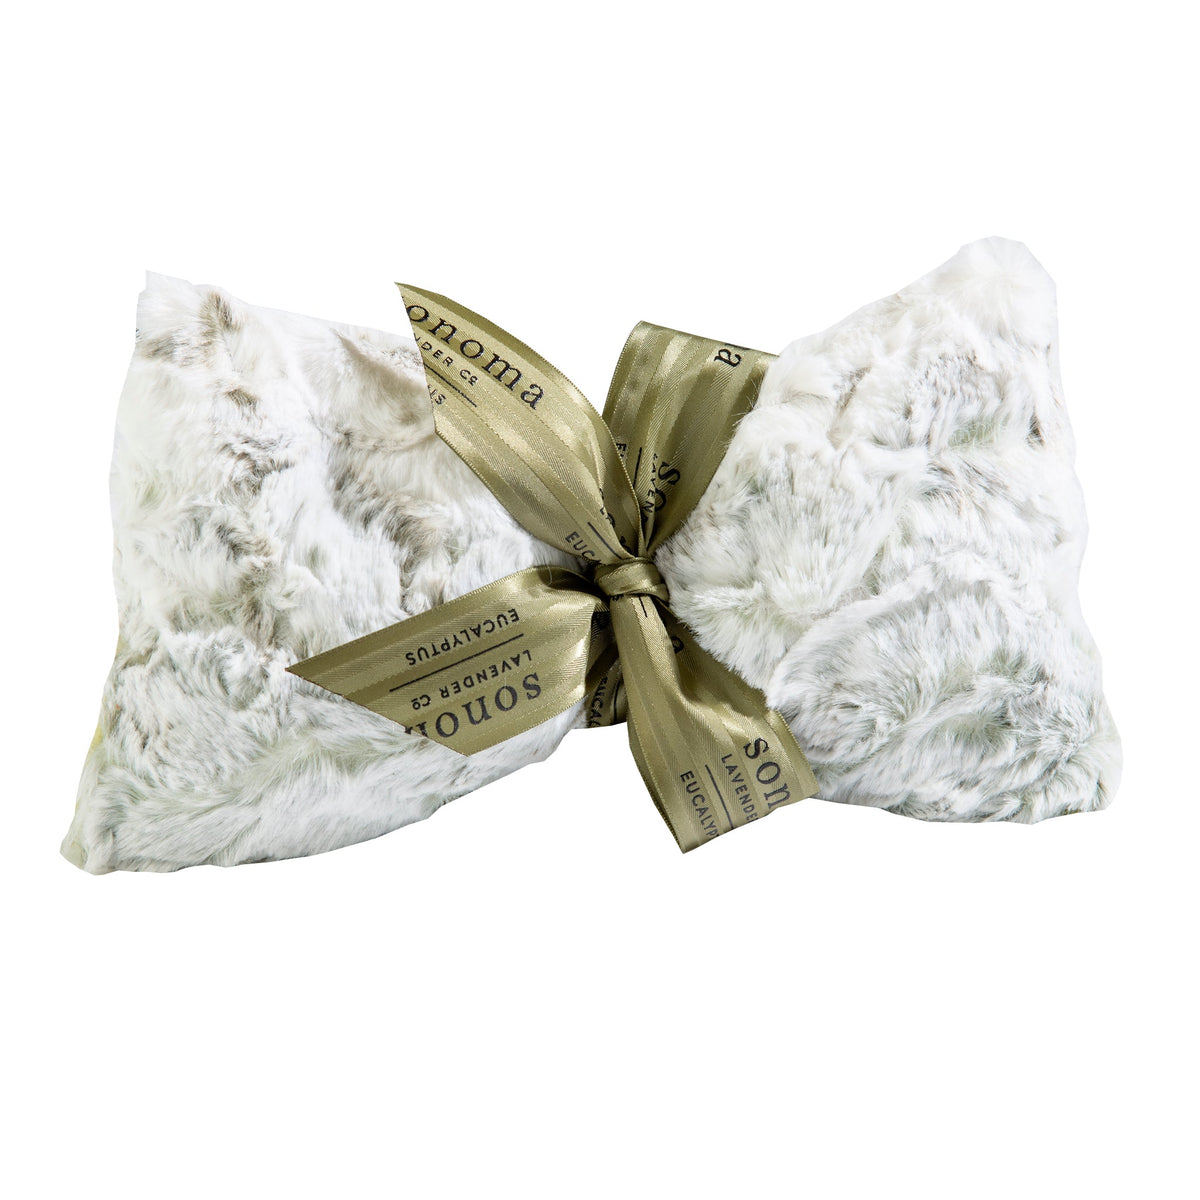 A plush, white faux fur Sonoma Eucalyptus Snowy Sage Spa (Sinus) mask shaped like a bow, tied with an elegant golden ribbon with text, isolated on a white background from Sonoma Lavender.